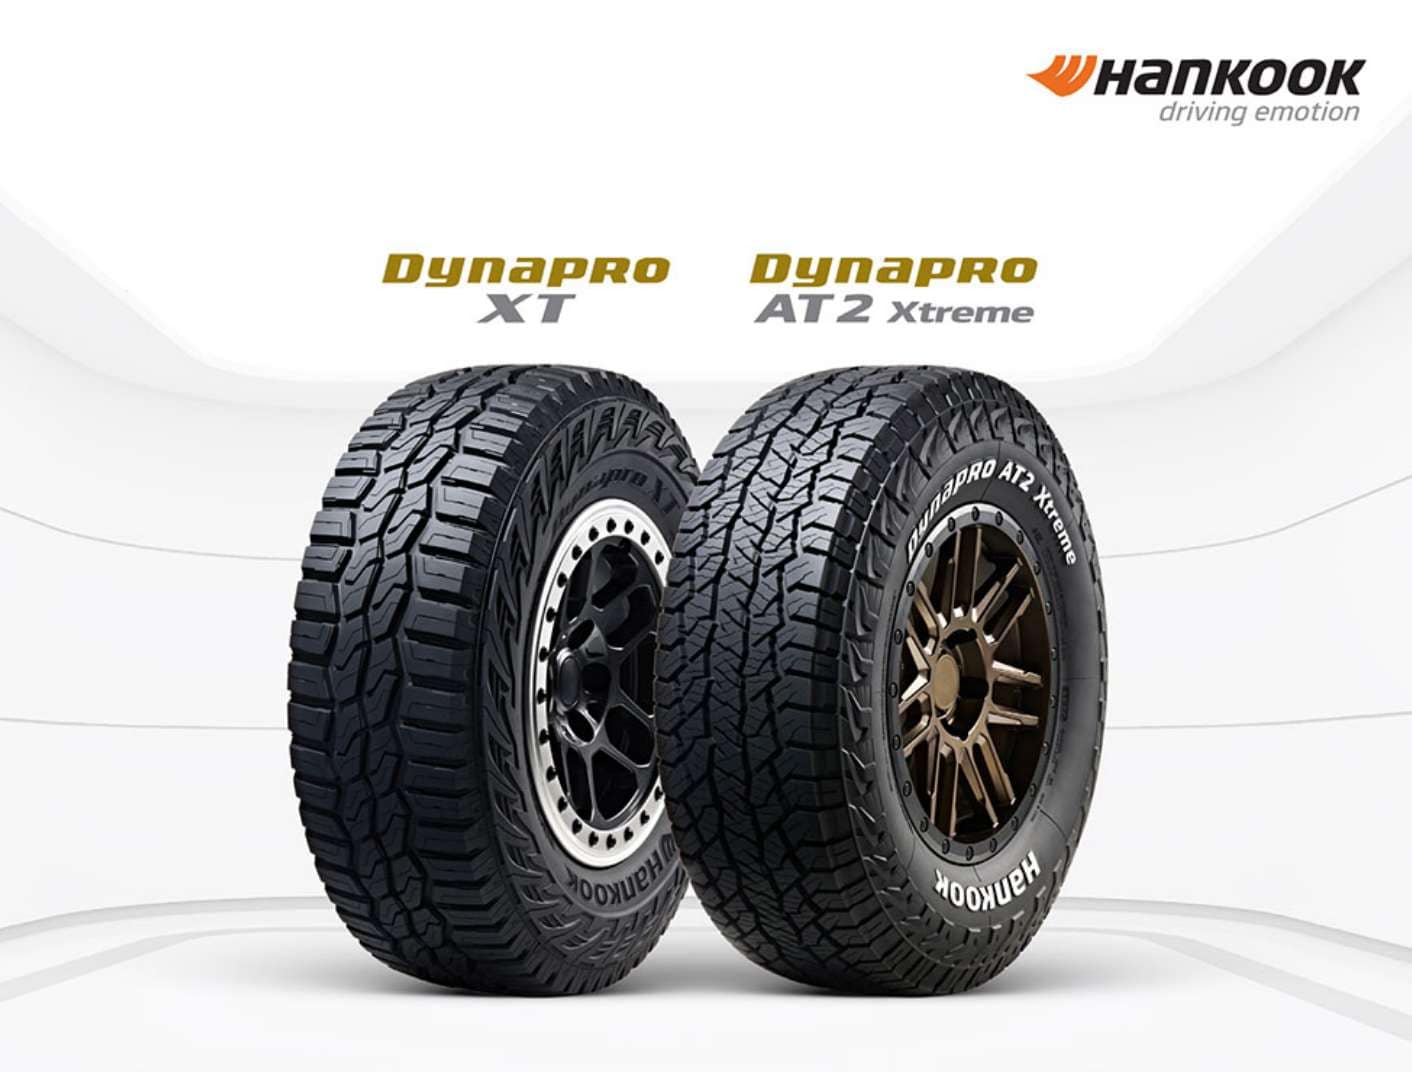 Hankook Tire unveils new Rugged Terrain Dynapro XT and next generation Dynapro AT2 Xtreme